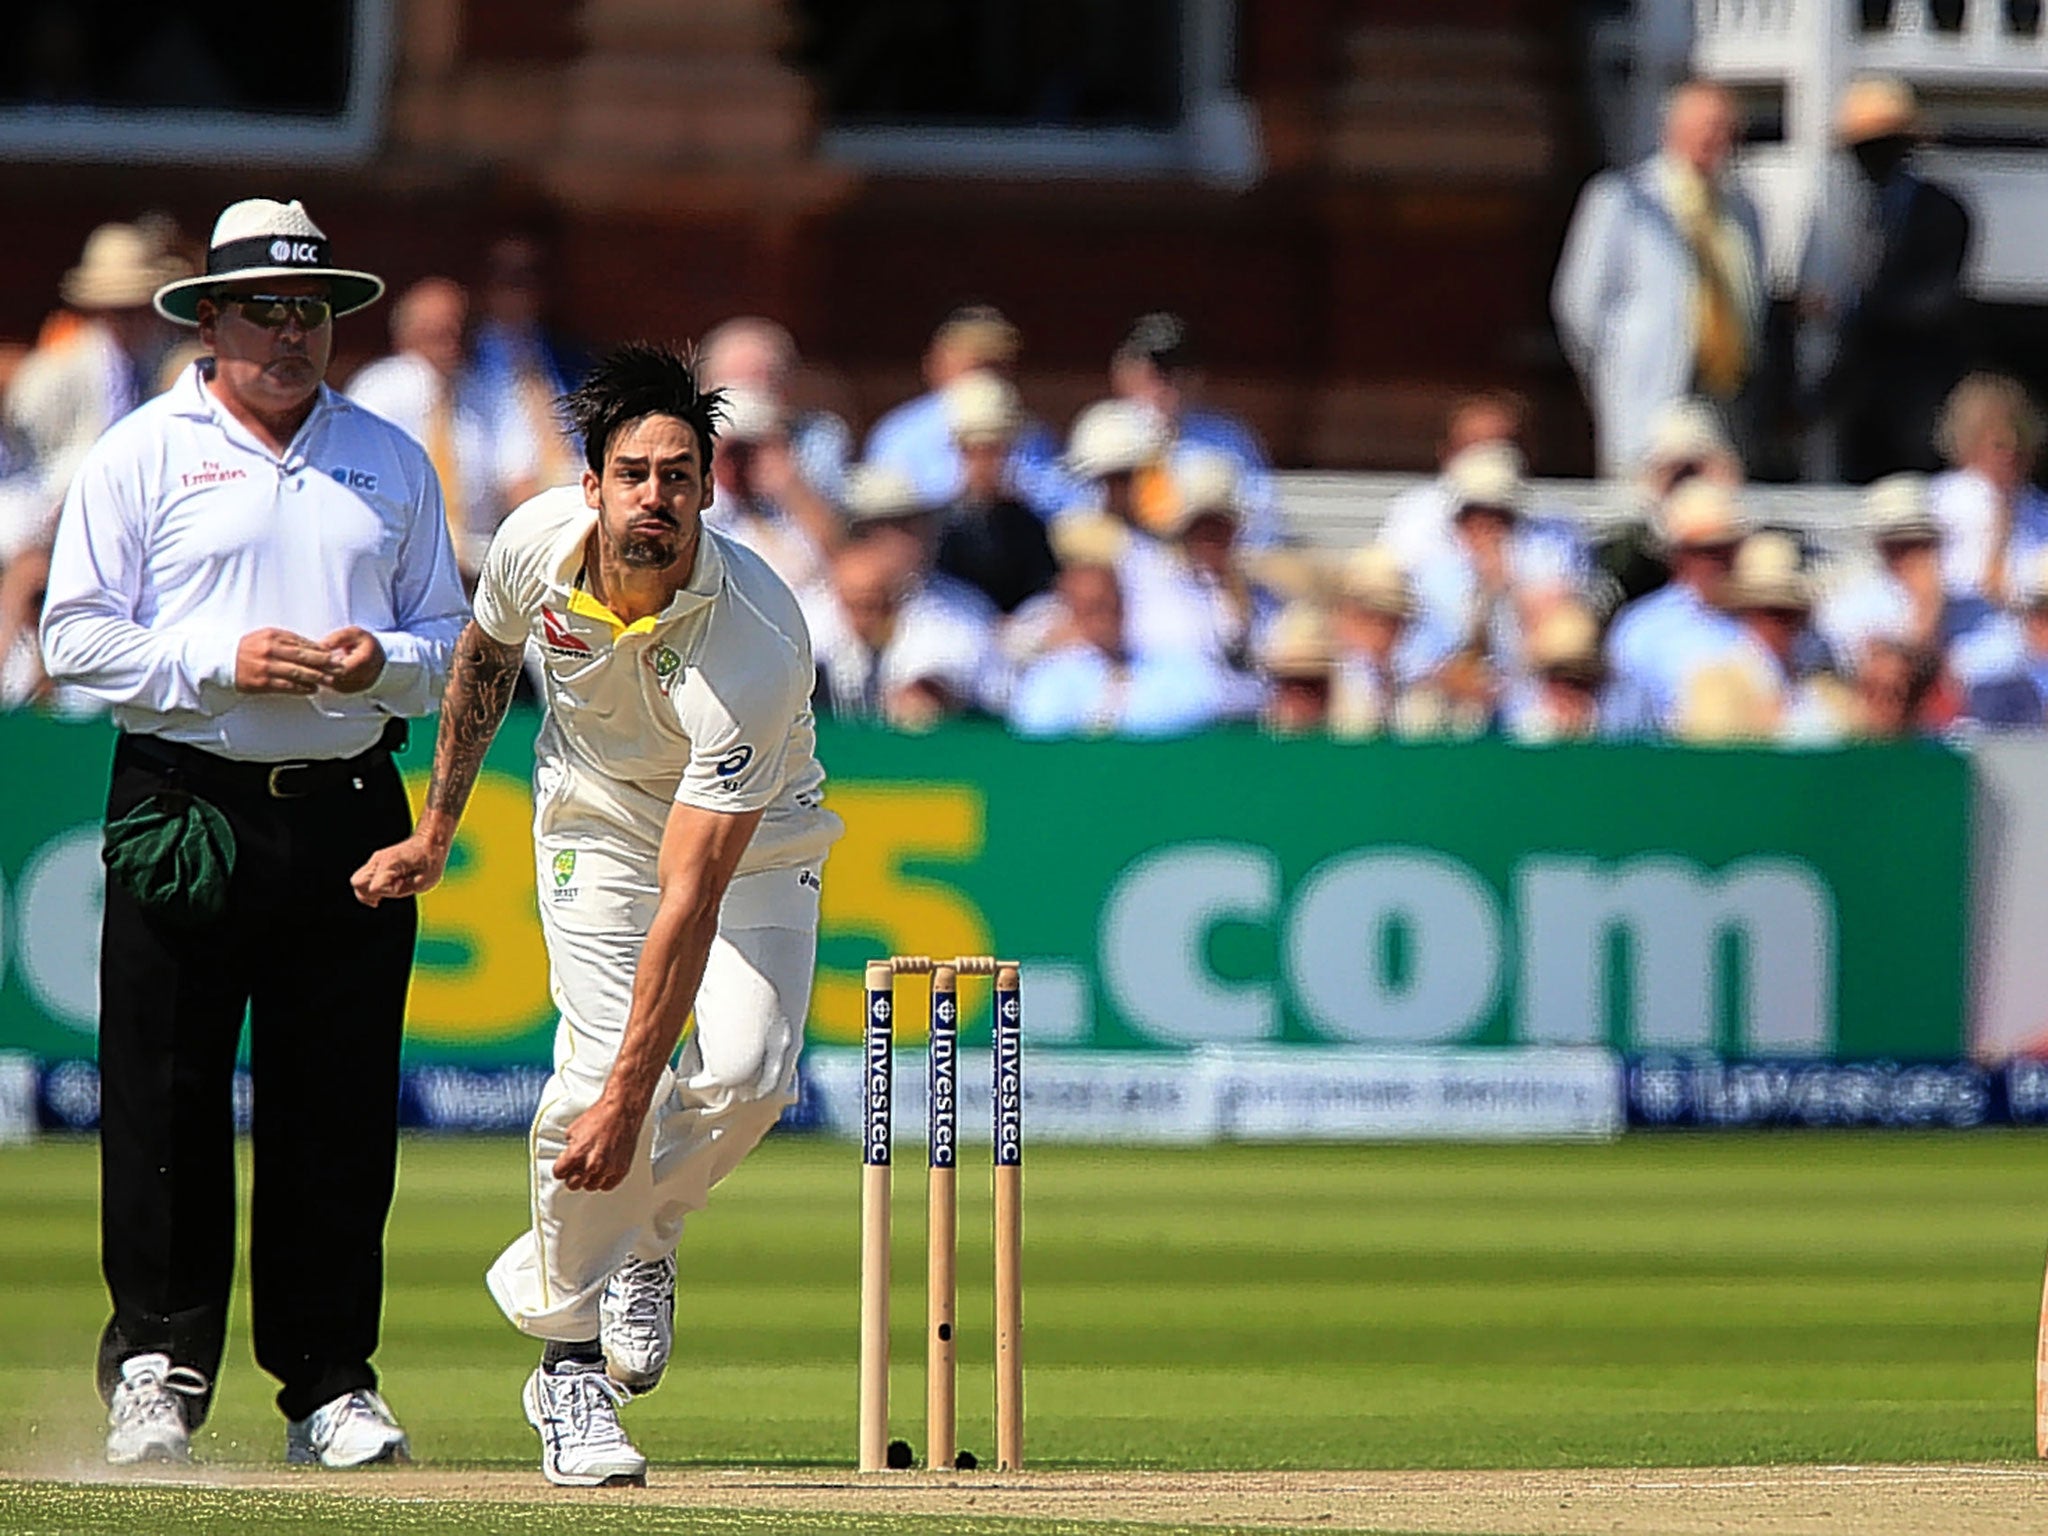 Mitchell Johnson has been used to maximum effect with short but explosive spells